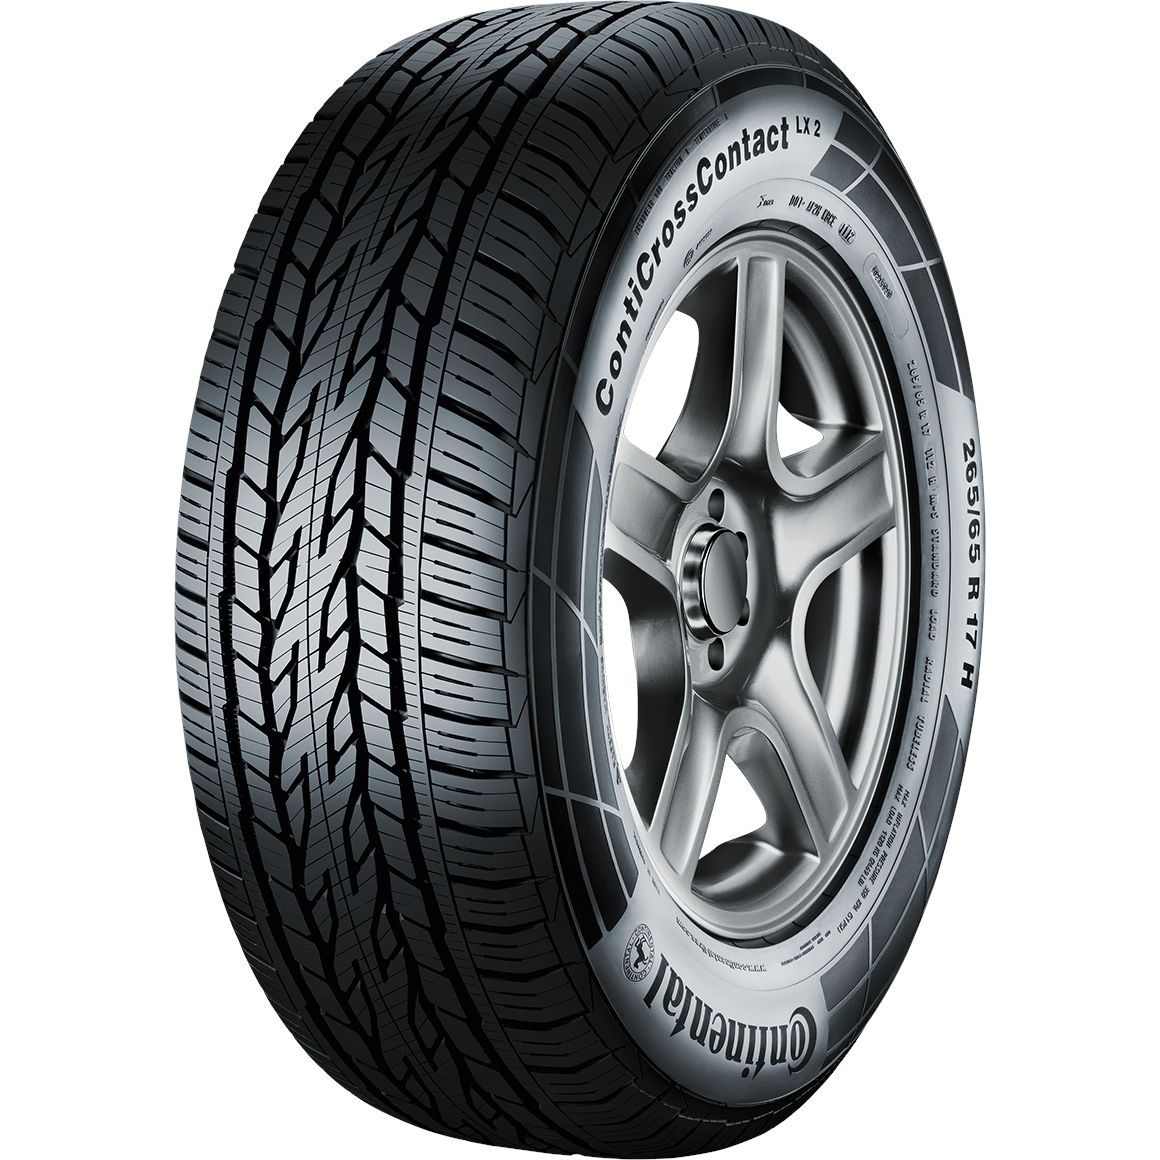 Continental 255/70R16 111T ContiCrossContact™ LX 2 TL M+S FR BSW